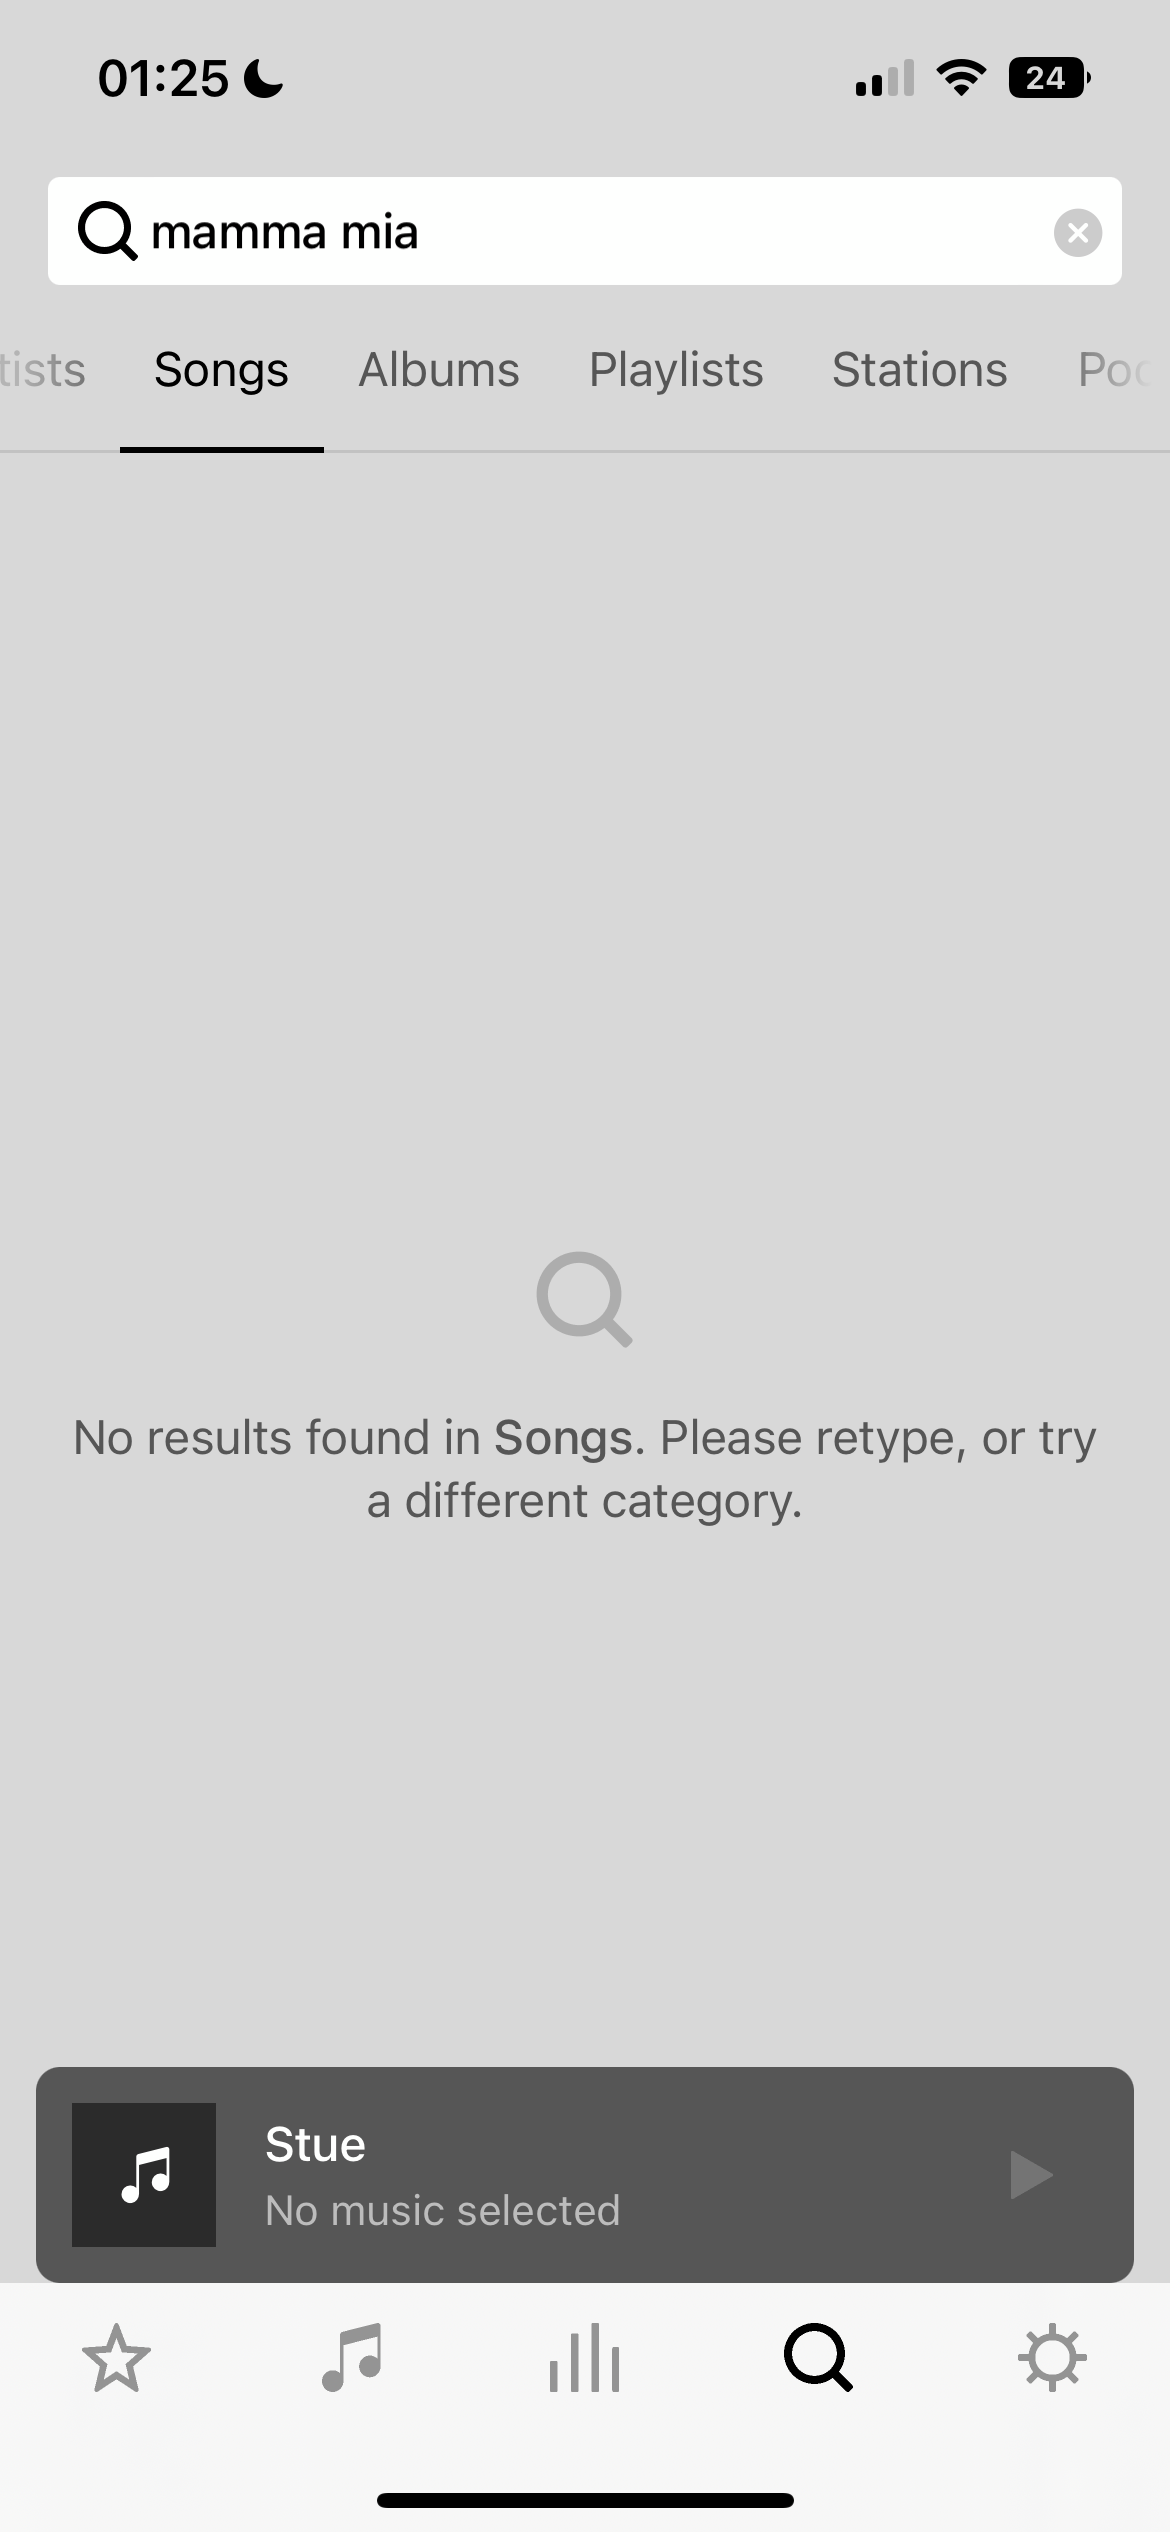 Sonos cannot songs from | Sonos Community